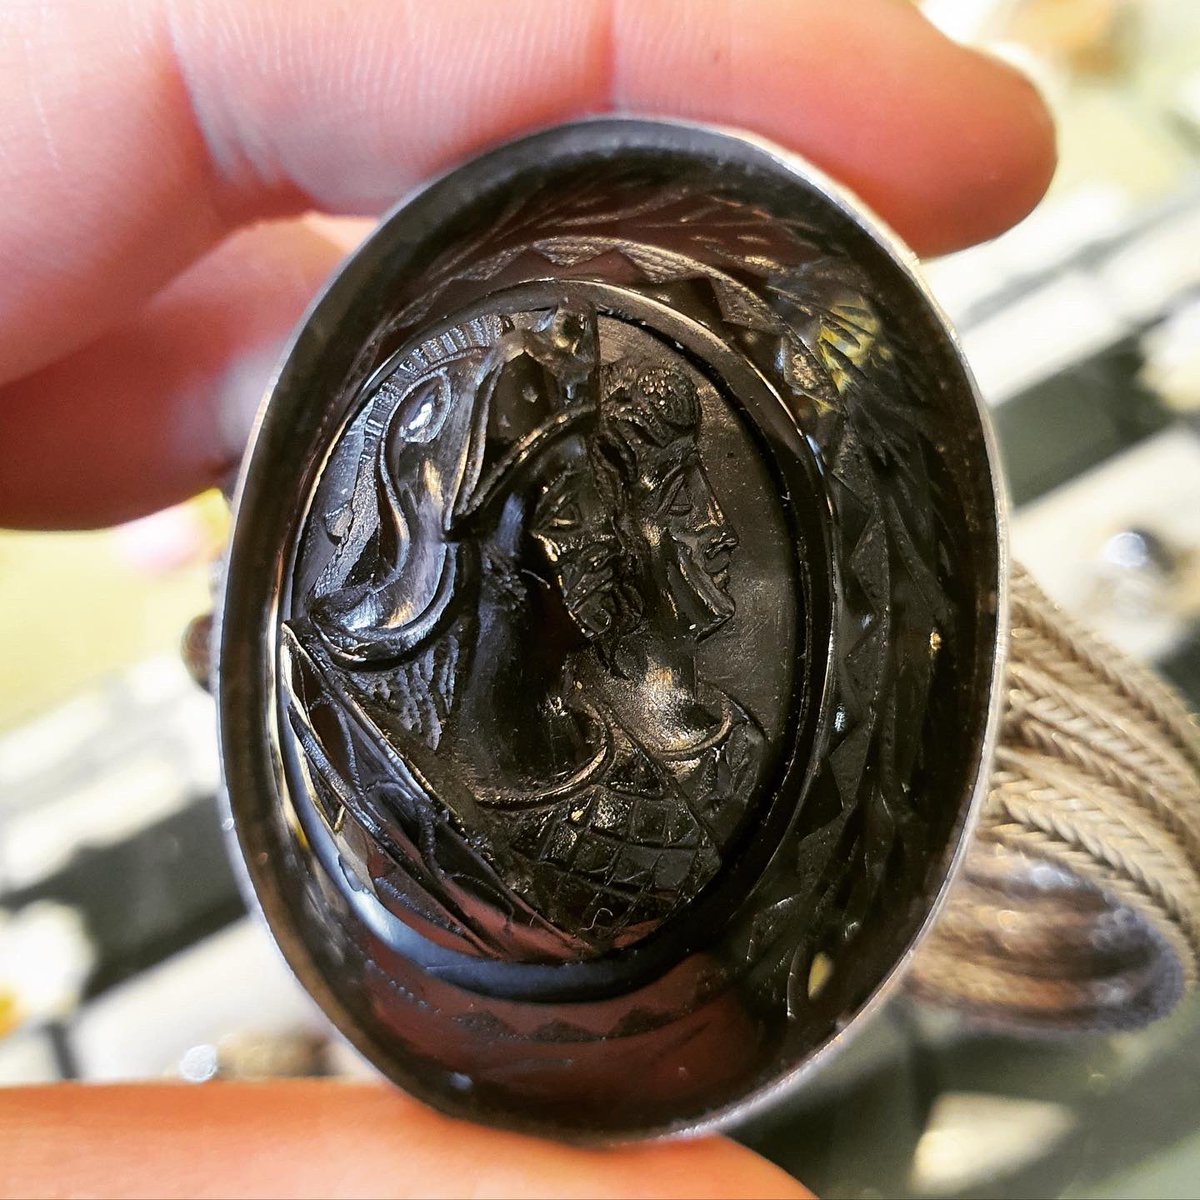 We love helping people unlock the secrets of their #WhitbyJet #jewellery!
Just the other day, we were able to confirm that a #cameo portrayed King Owsy and Queen Eanflaed, the king and queen of Northumbria from 654 AD and was carved by jet worker William Lund
#MuseumofWhitbyJet